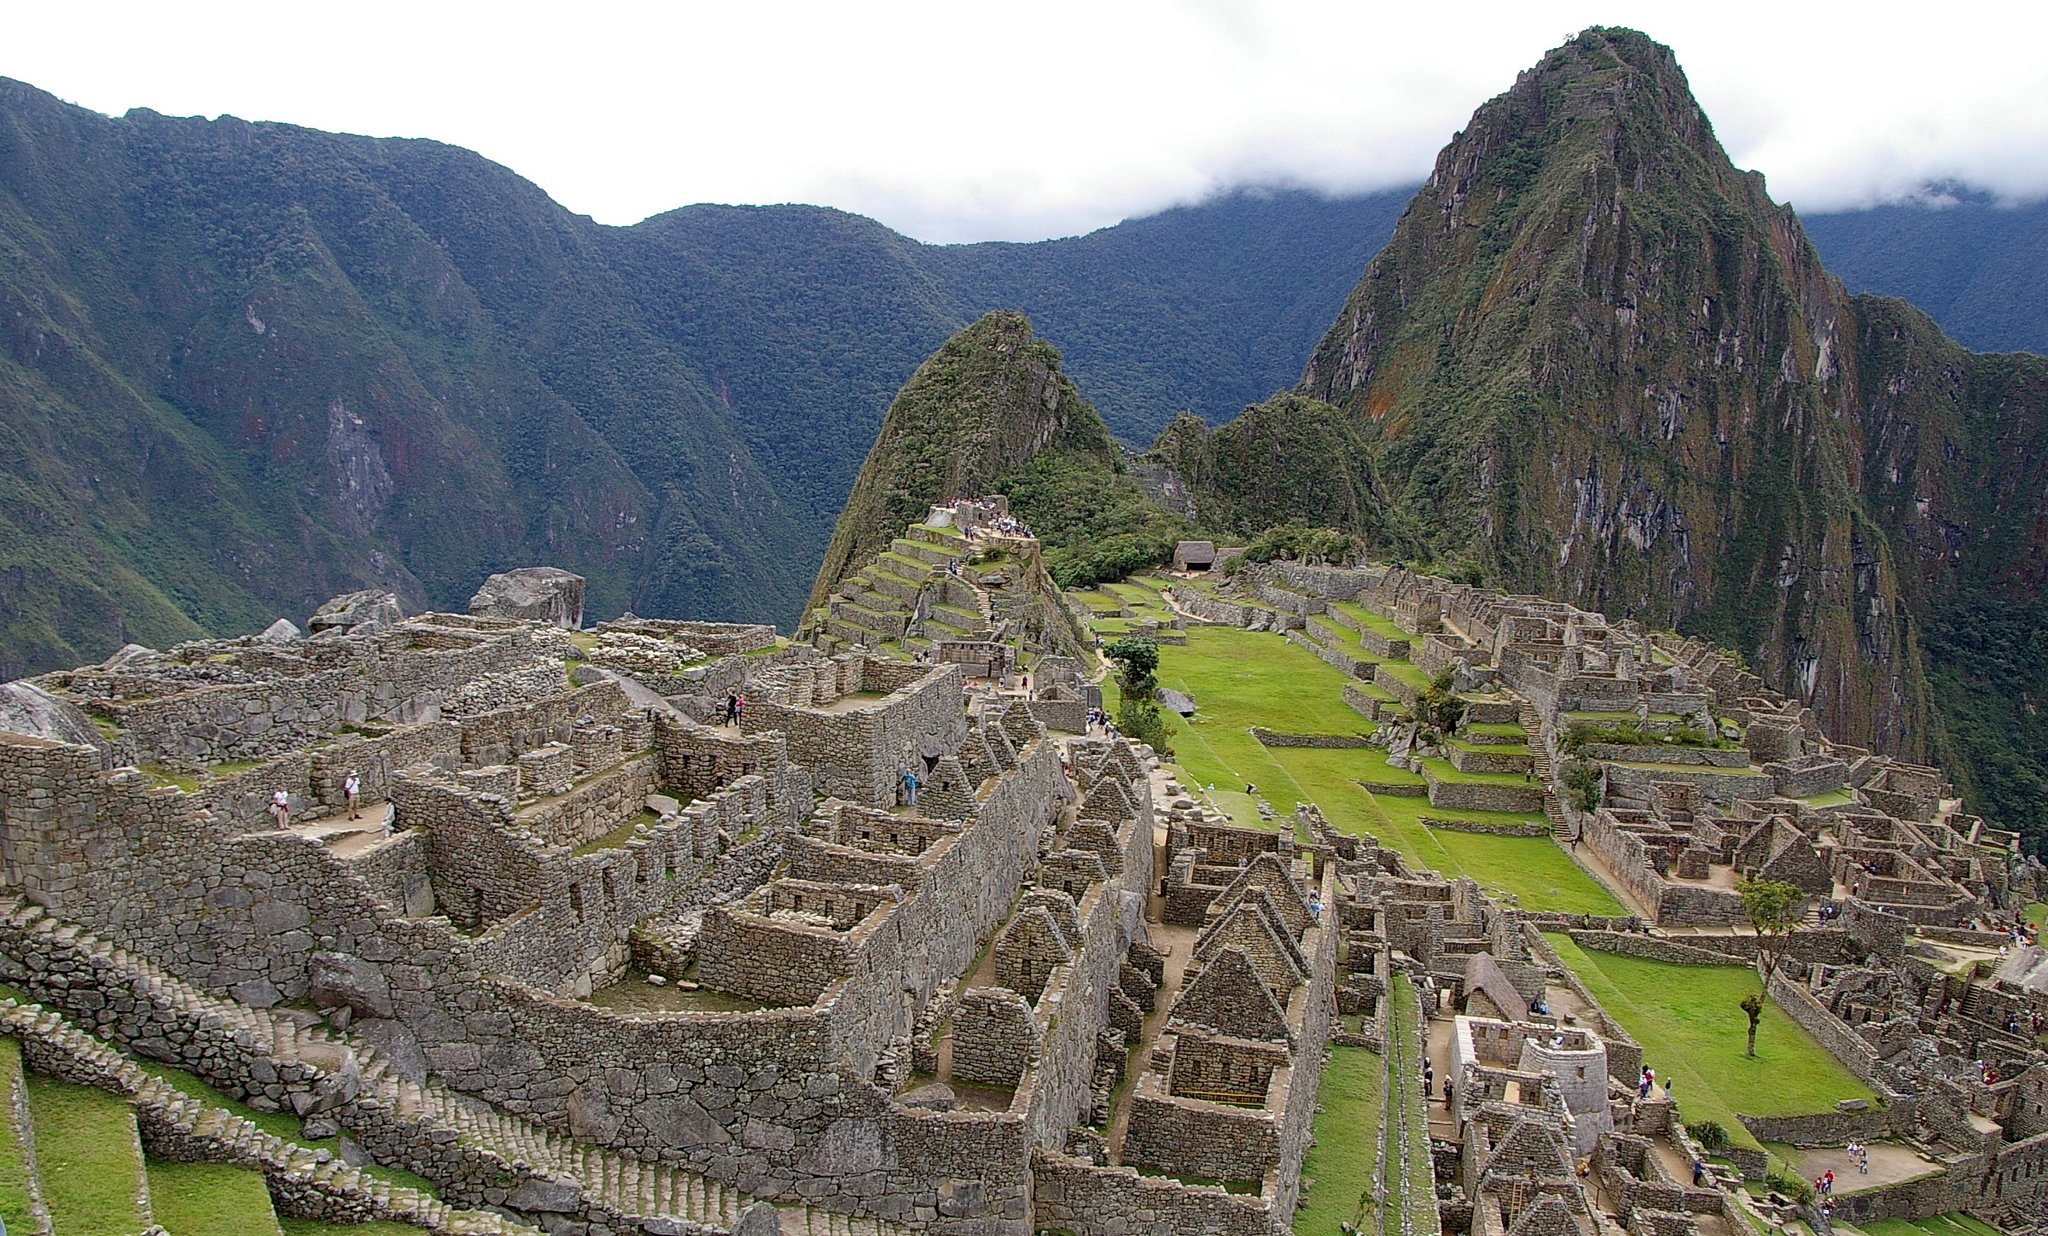 Pentax *ist DS sample photo. The lost incas city. photography